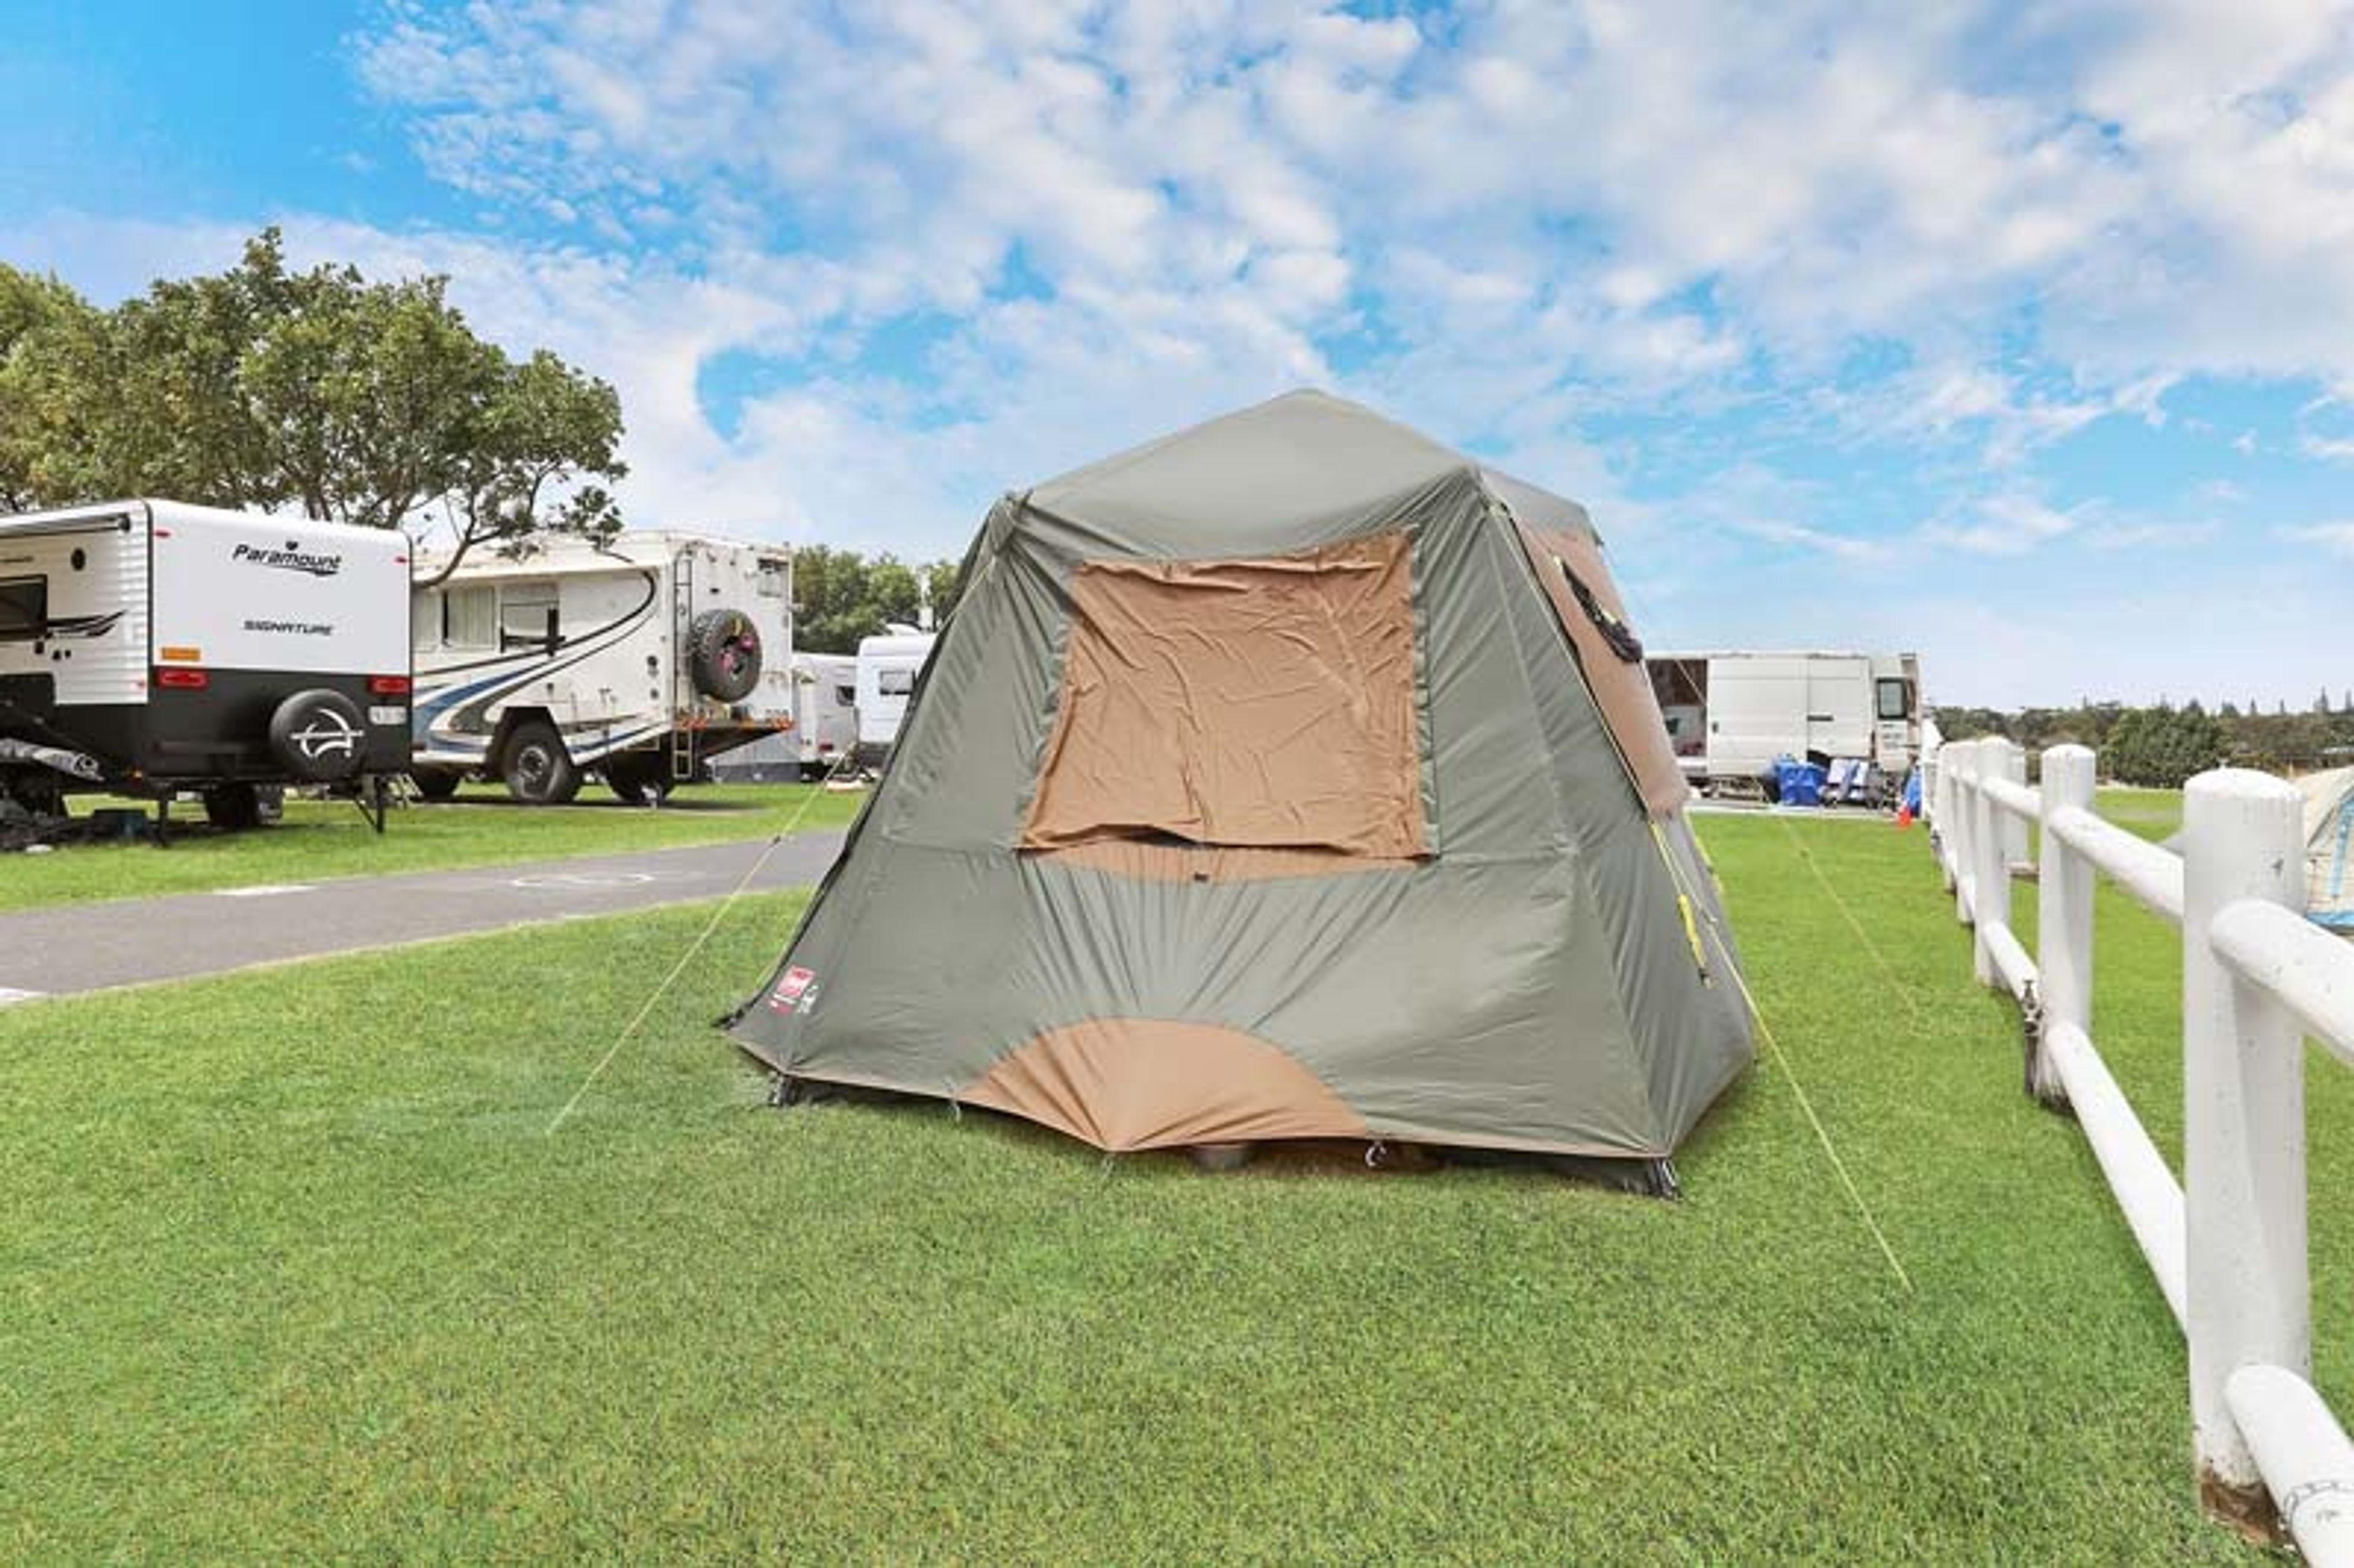 Shaws Bay - Standard Powered Site - Tent